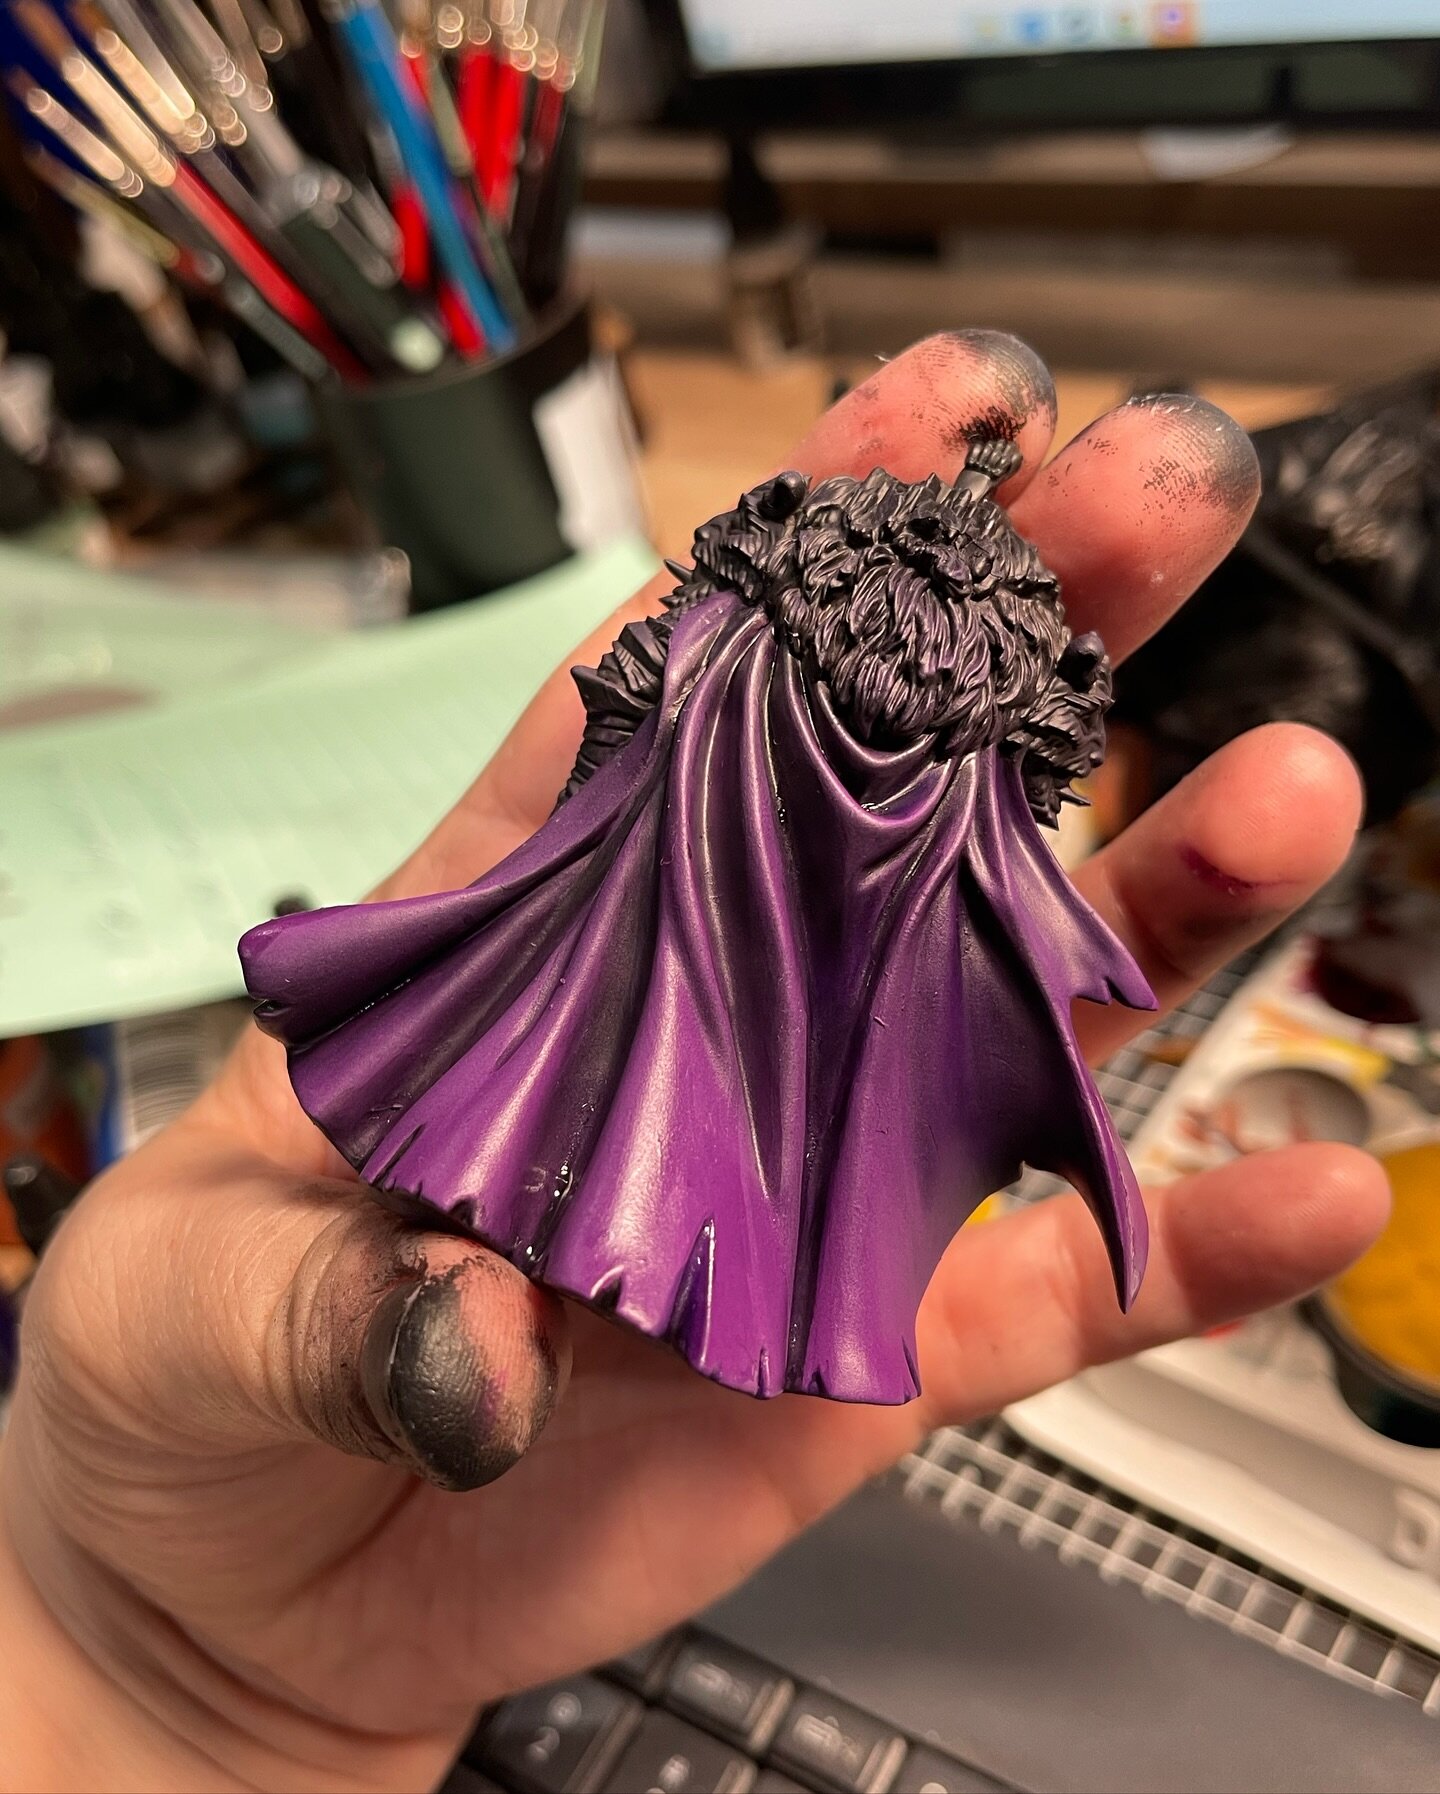 I started working on this Black Knight by @kingdomdeath. I have to say the plastic version is just as good if not better than the original resin cast version!
I painted one back in 2016 and I wanted to see if I could pull off the vibe in the same way